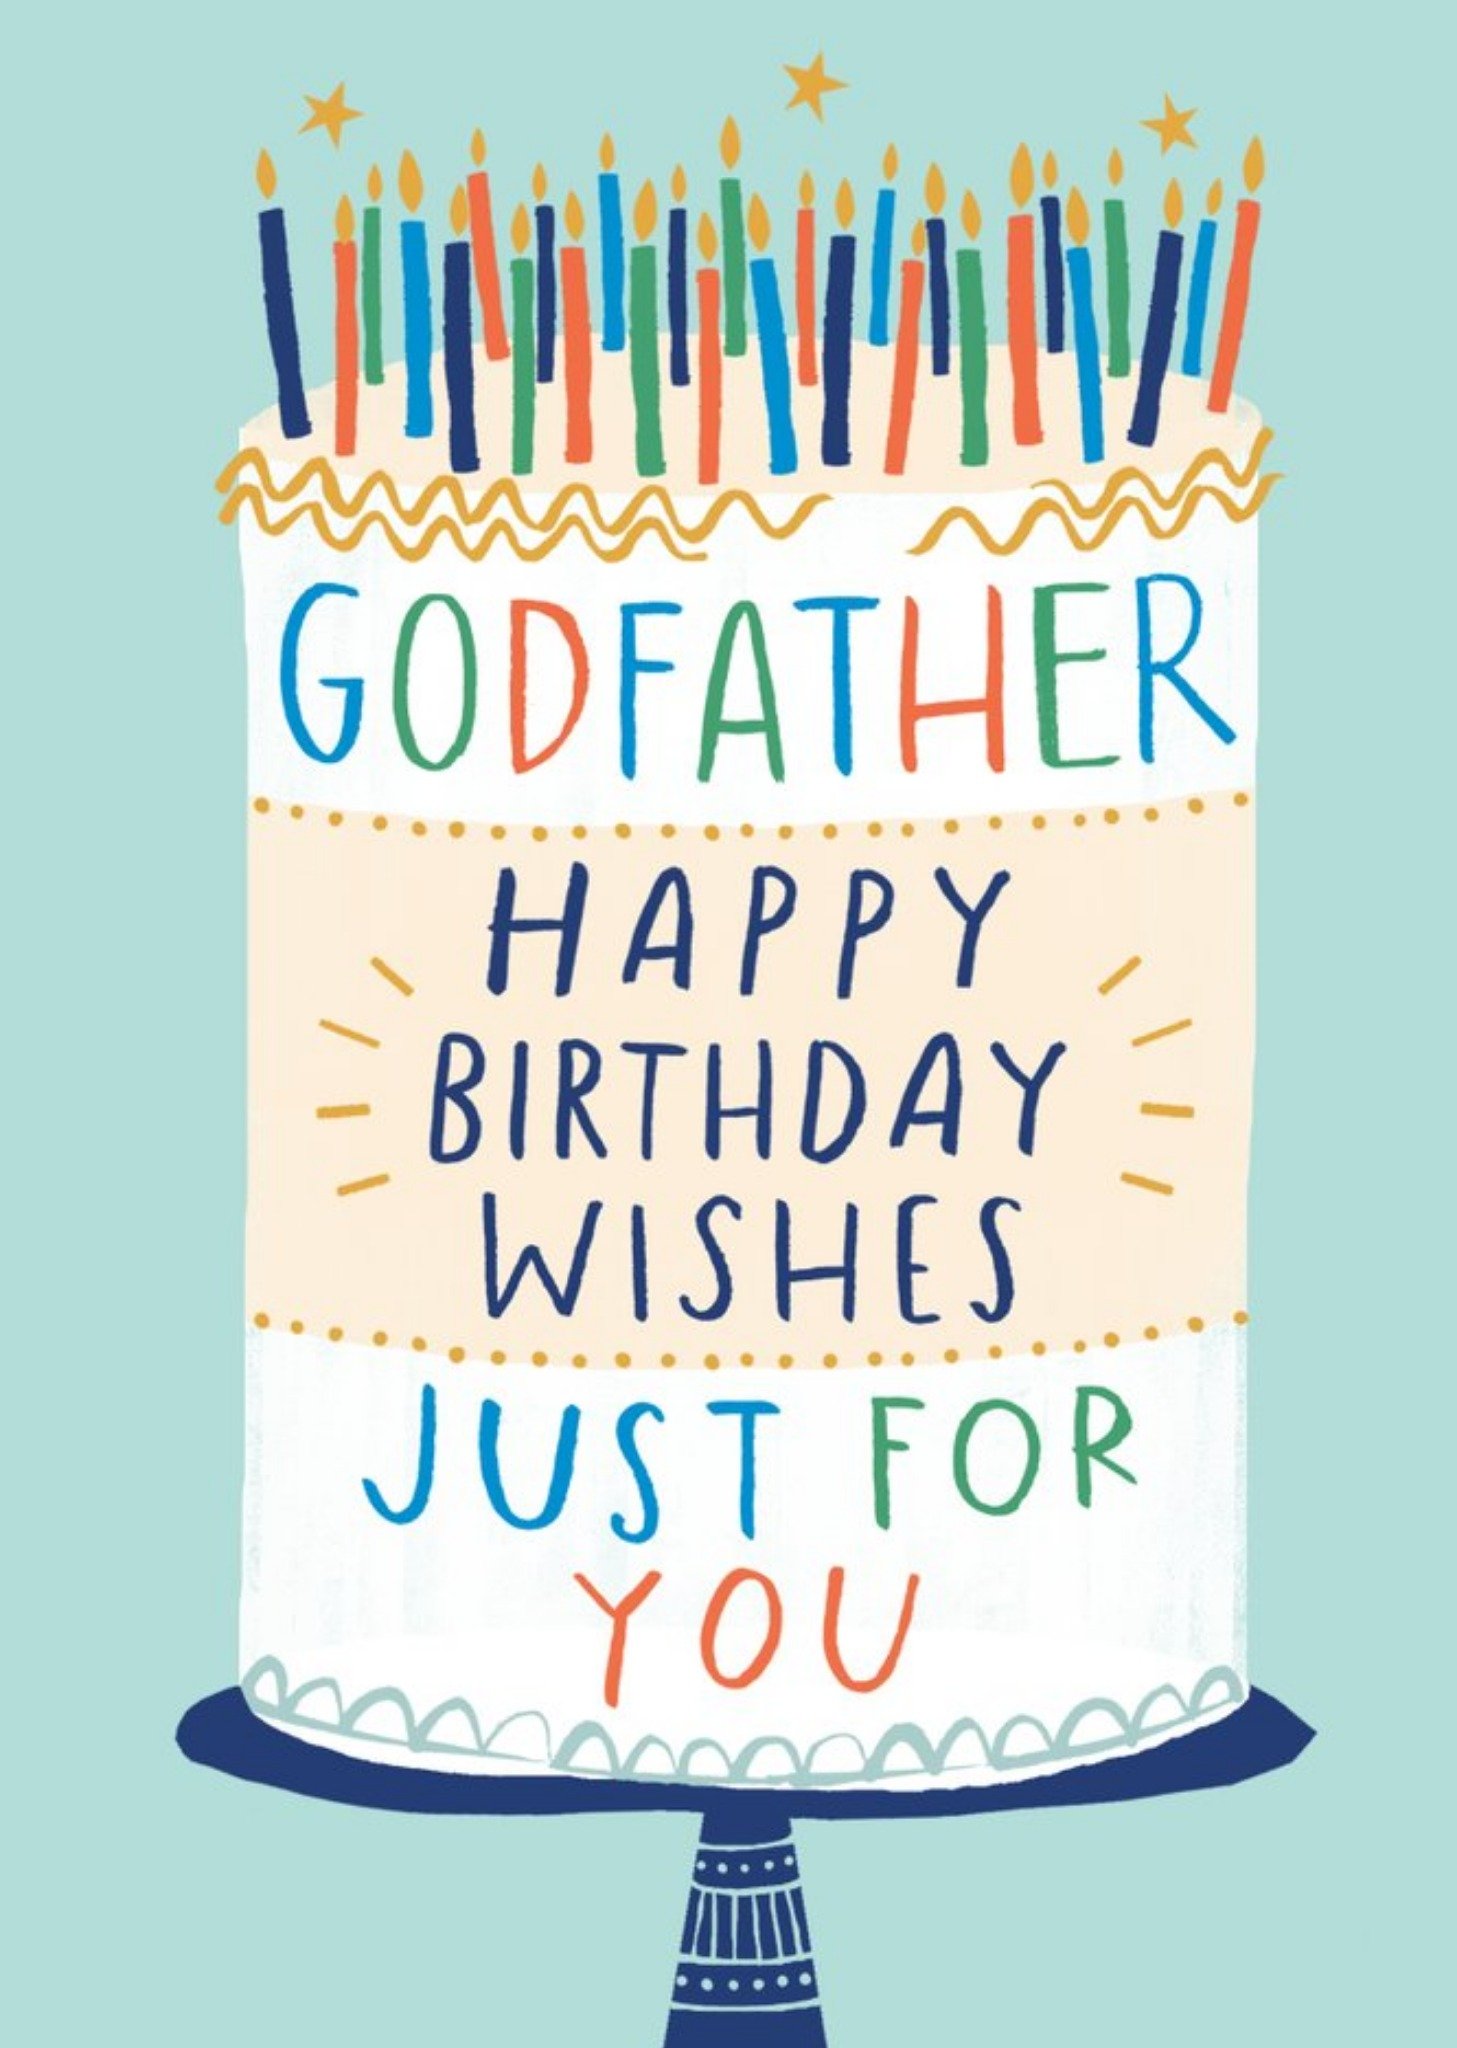 Moonpig Illustration Of A Birthday Cake On A Teal Background Godfather's Birthday Card, Large